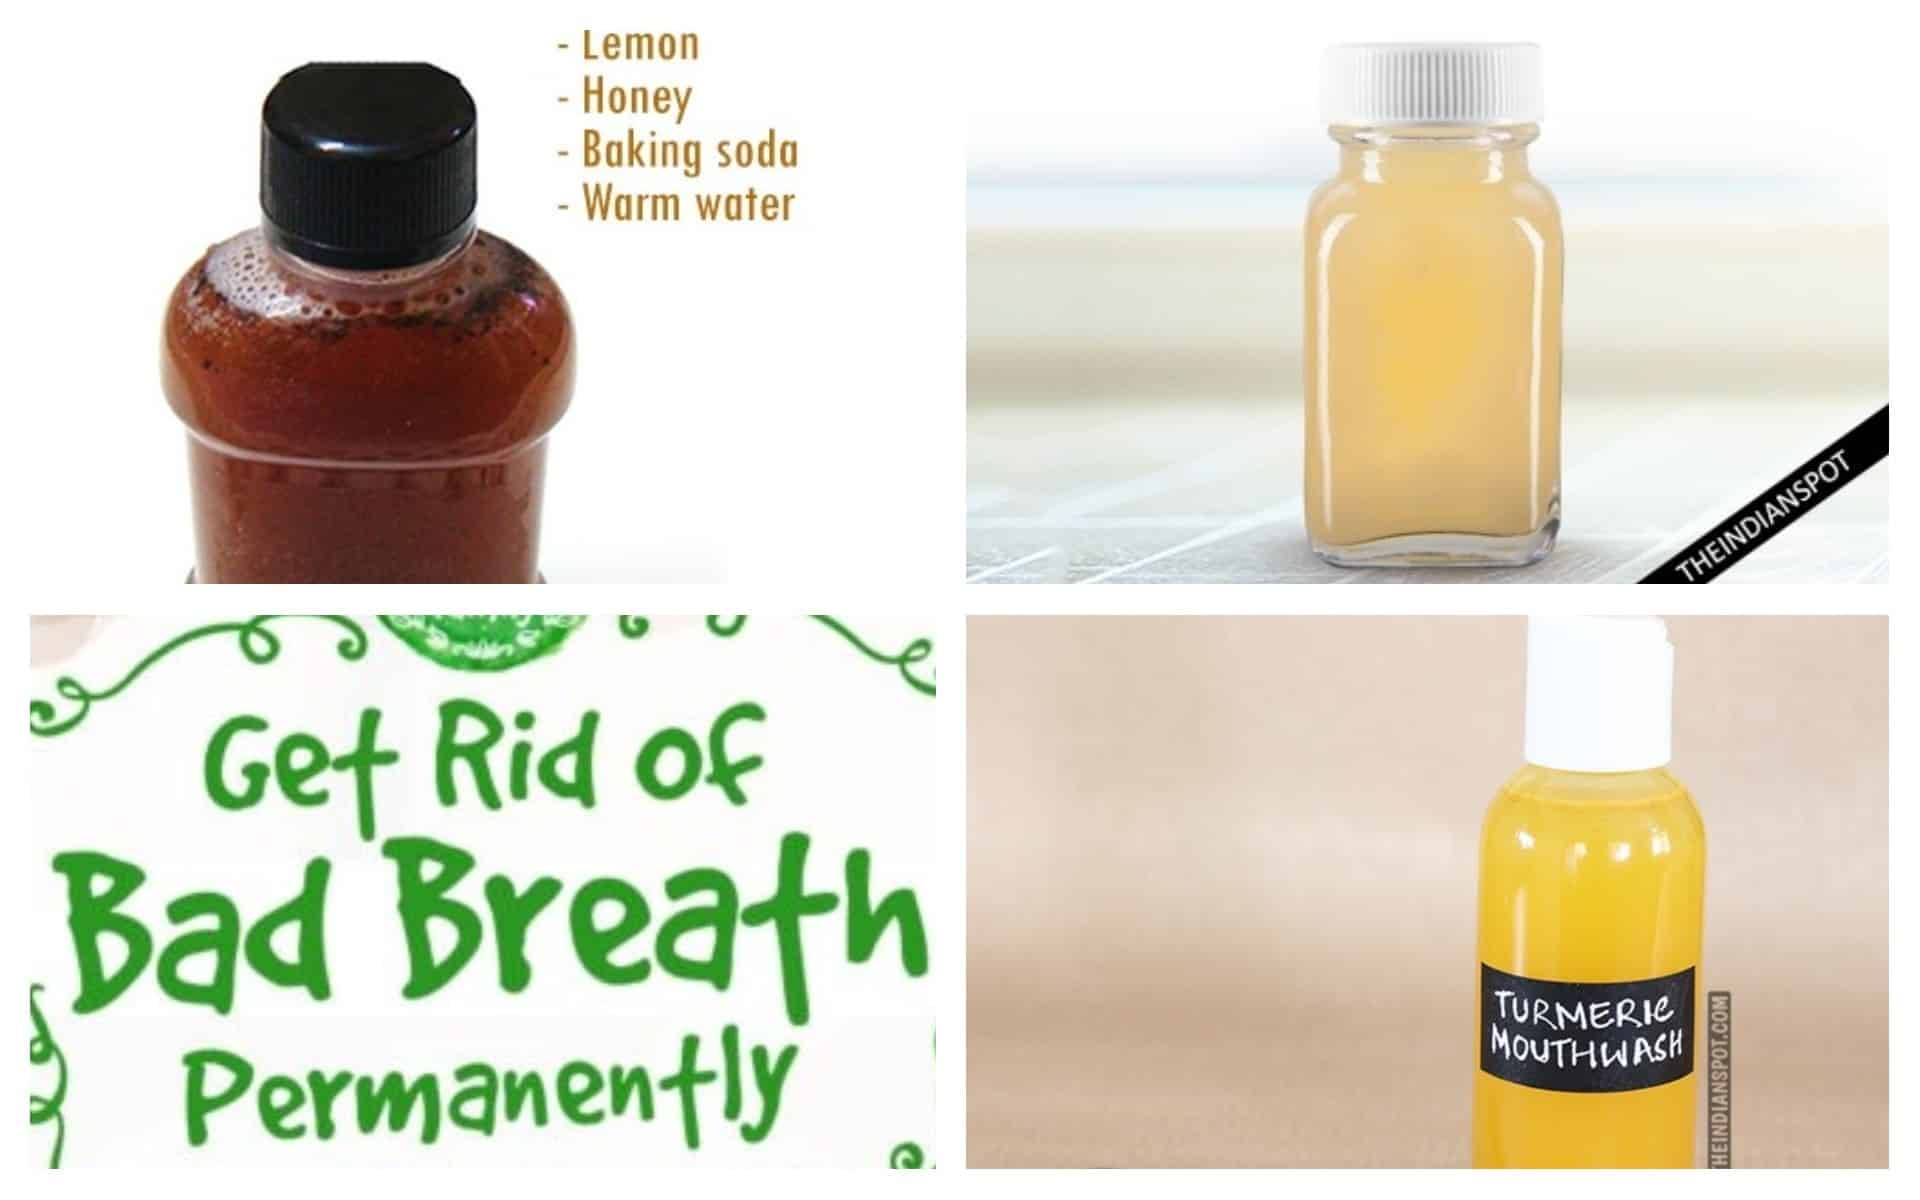 Effective Homemade Mouthwash Recipes That Will Help You Get Rid Of Bad